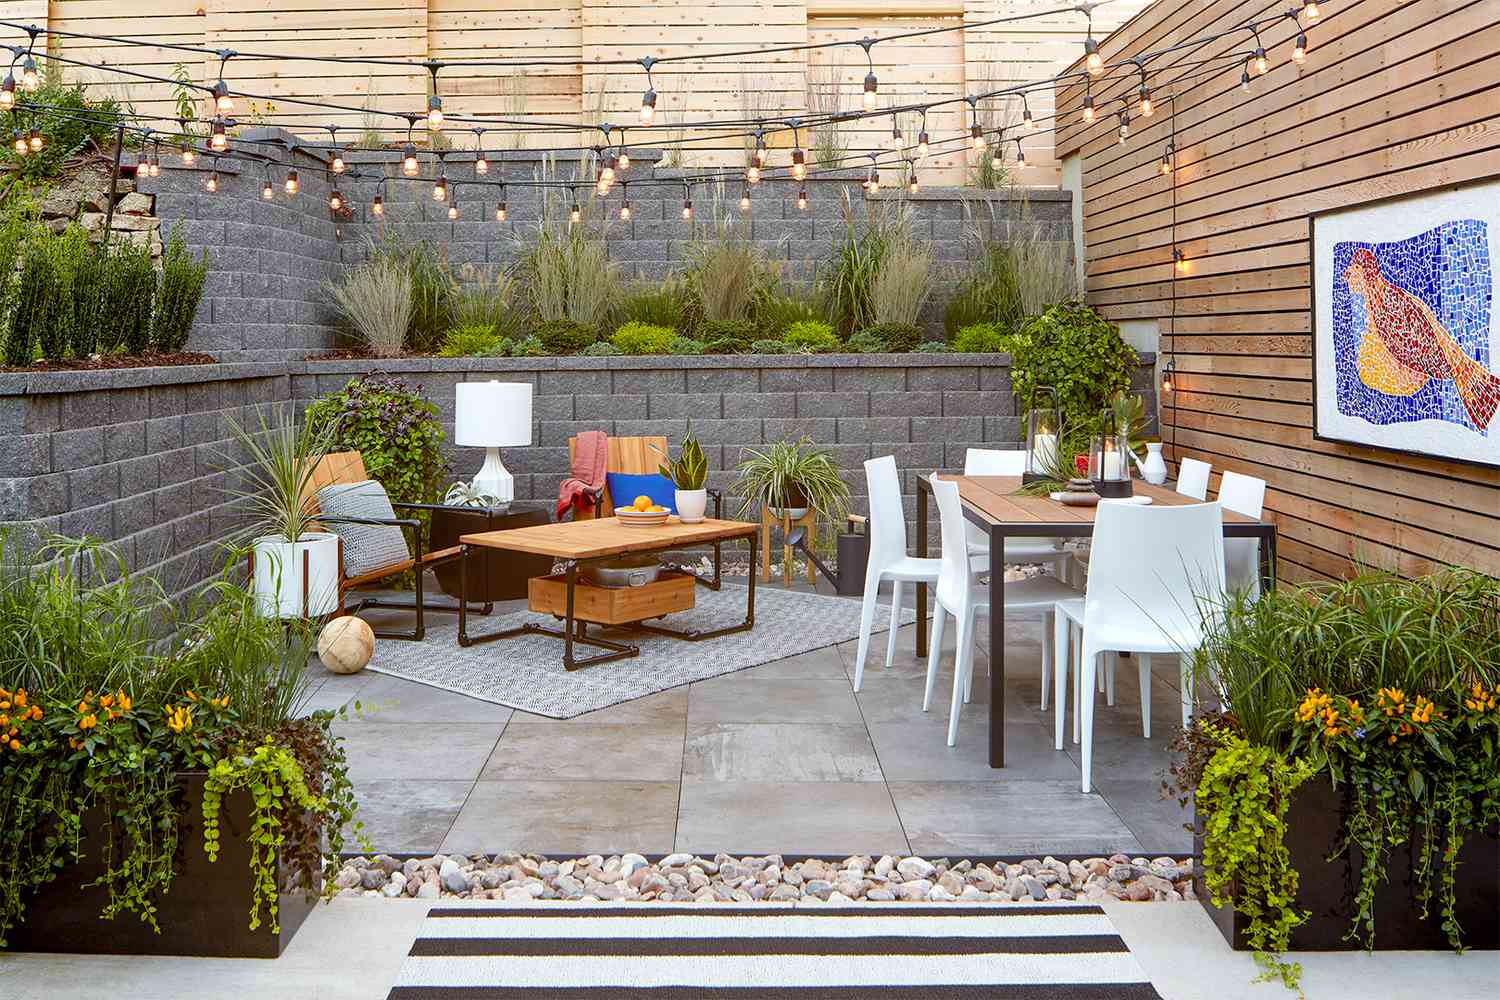 How To Install Poles Hang String Lights In Your Backyard Better Homes Gardens